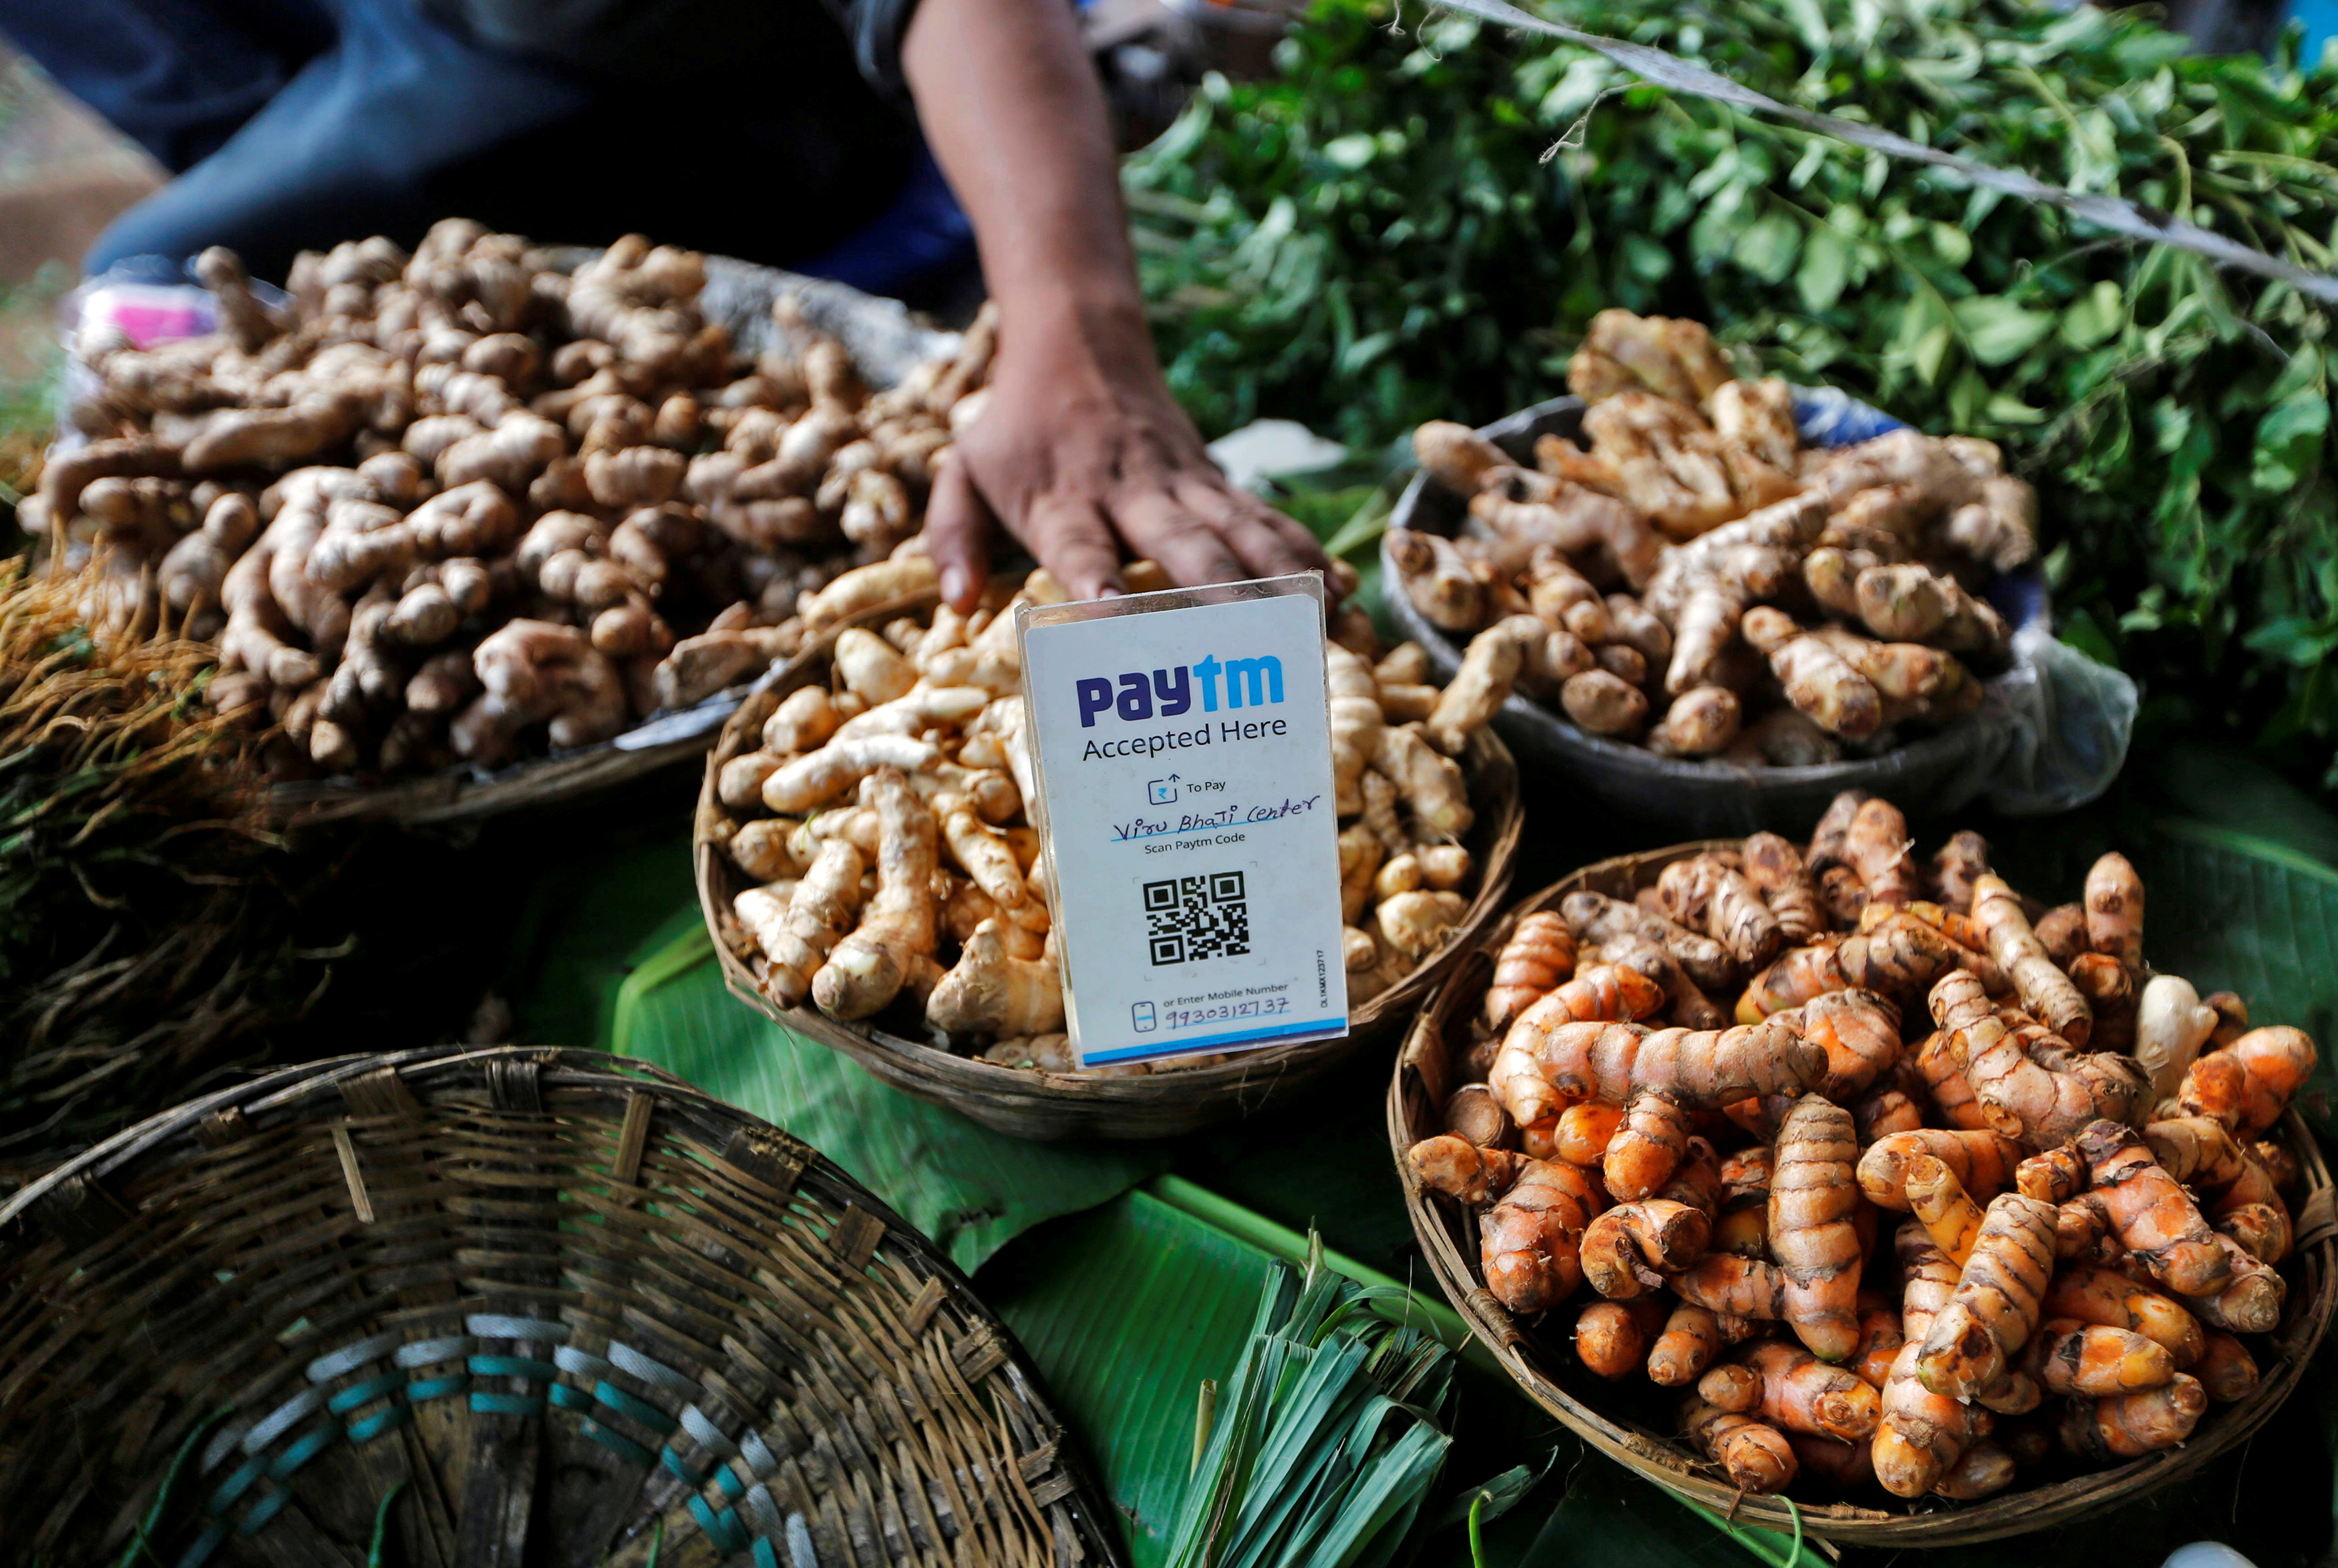 An advertisement board displaying a QR code for Paytm, a digital wallet company, is seen placed amidst vegetables at a roadside vendor's stall in Mumbai